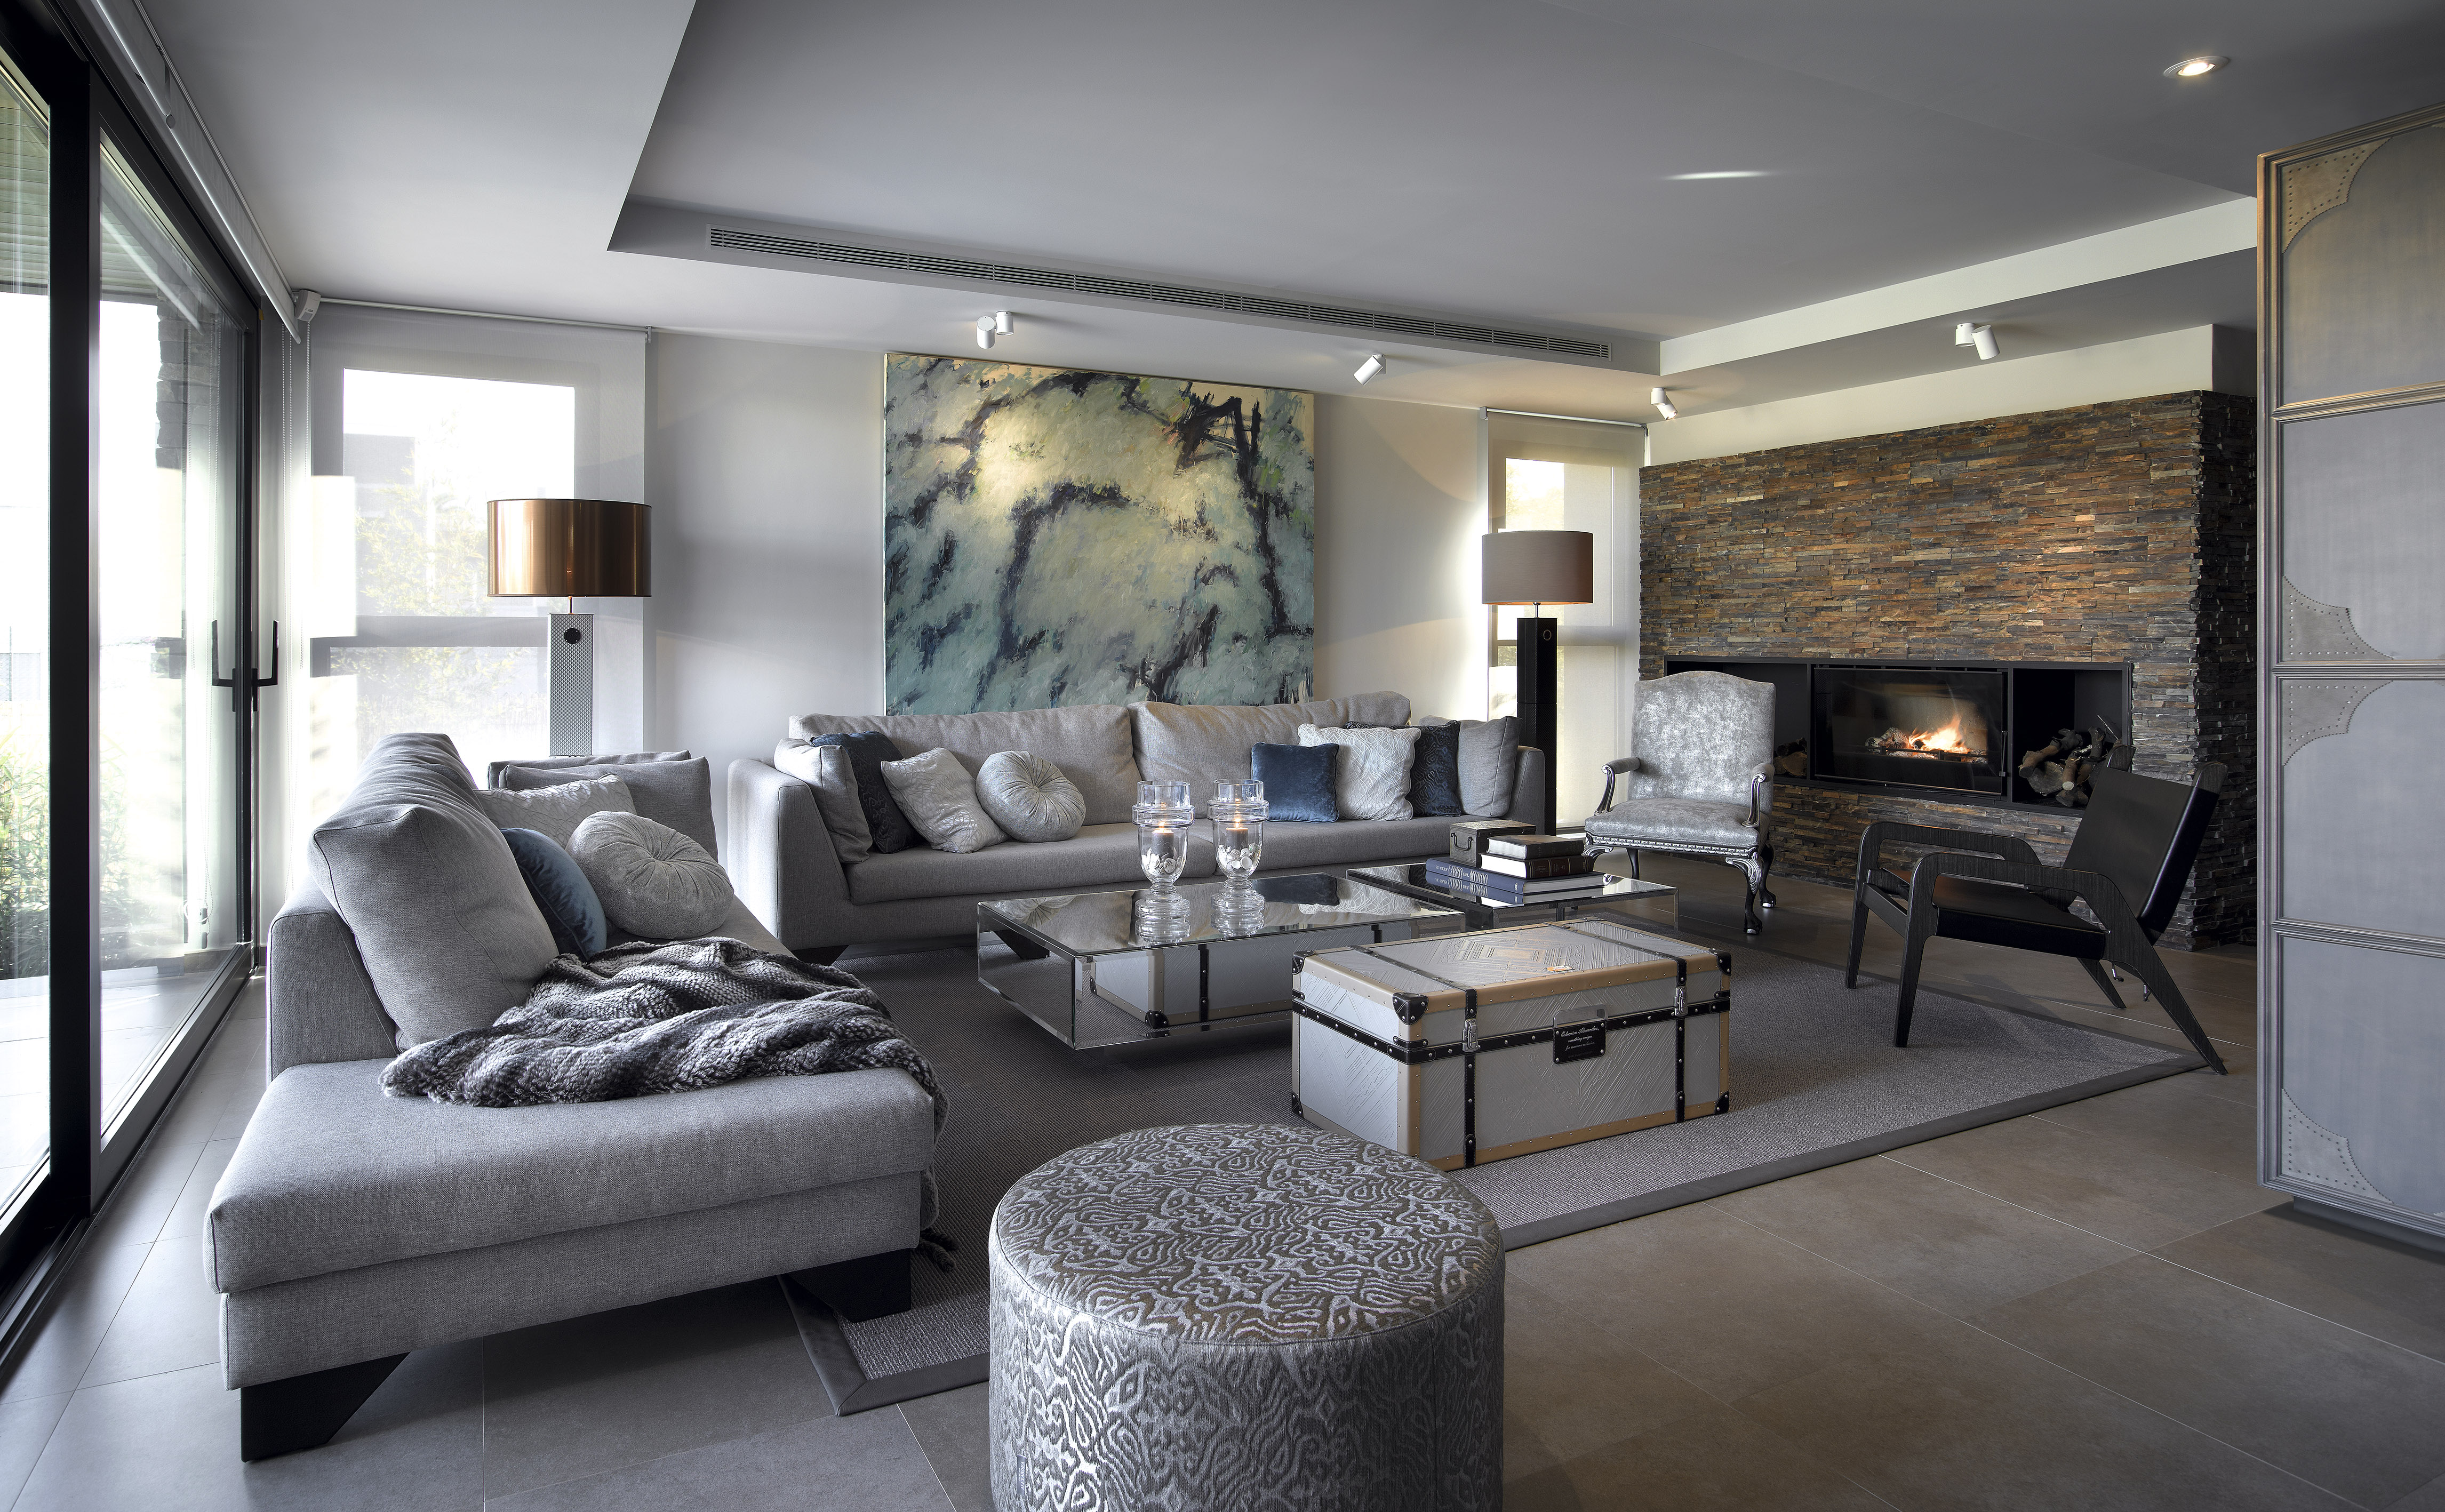 Entertaining In Elegance: Luxury Lounge And Living Room Ideas